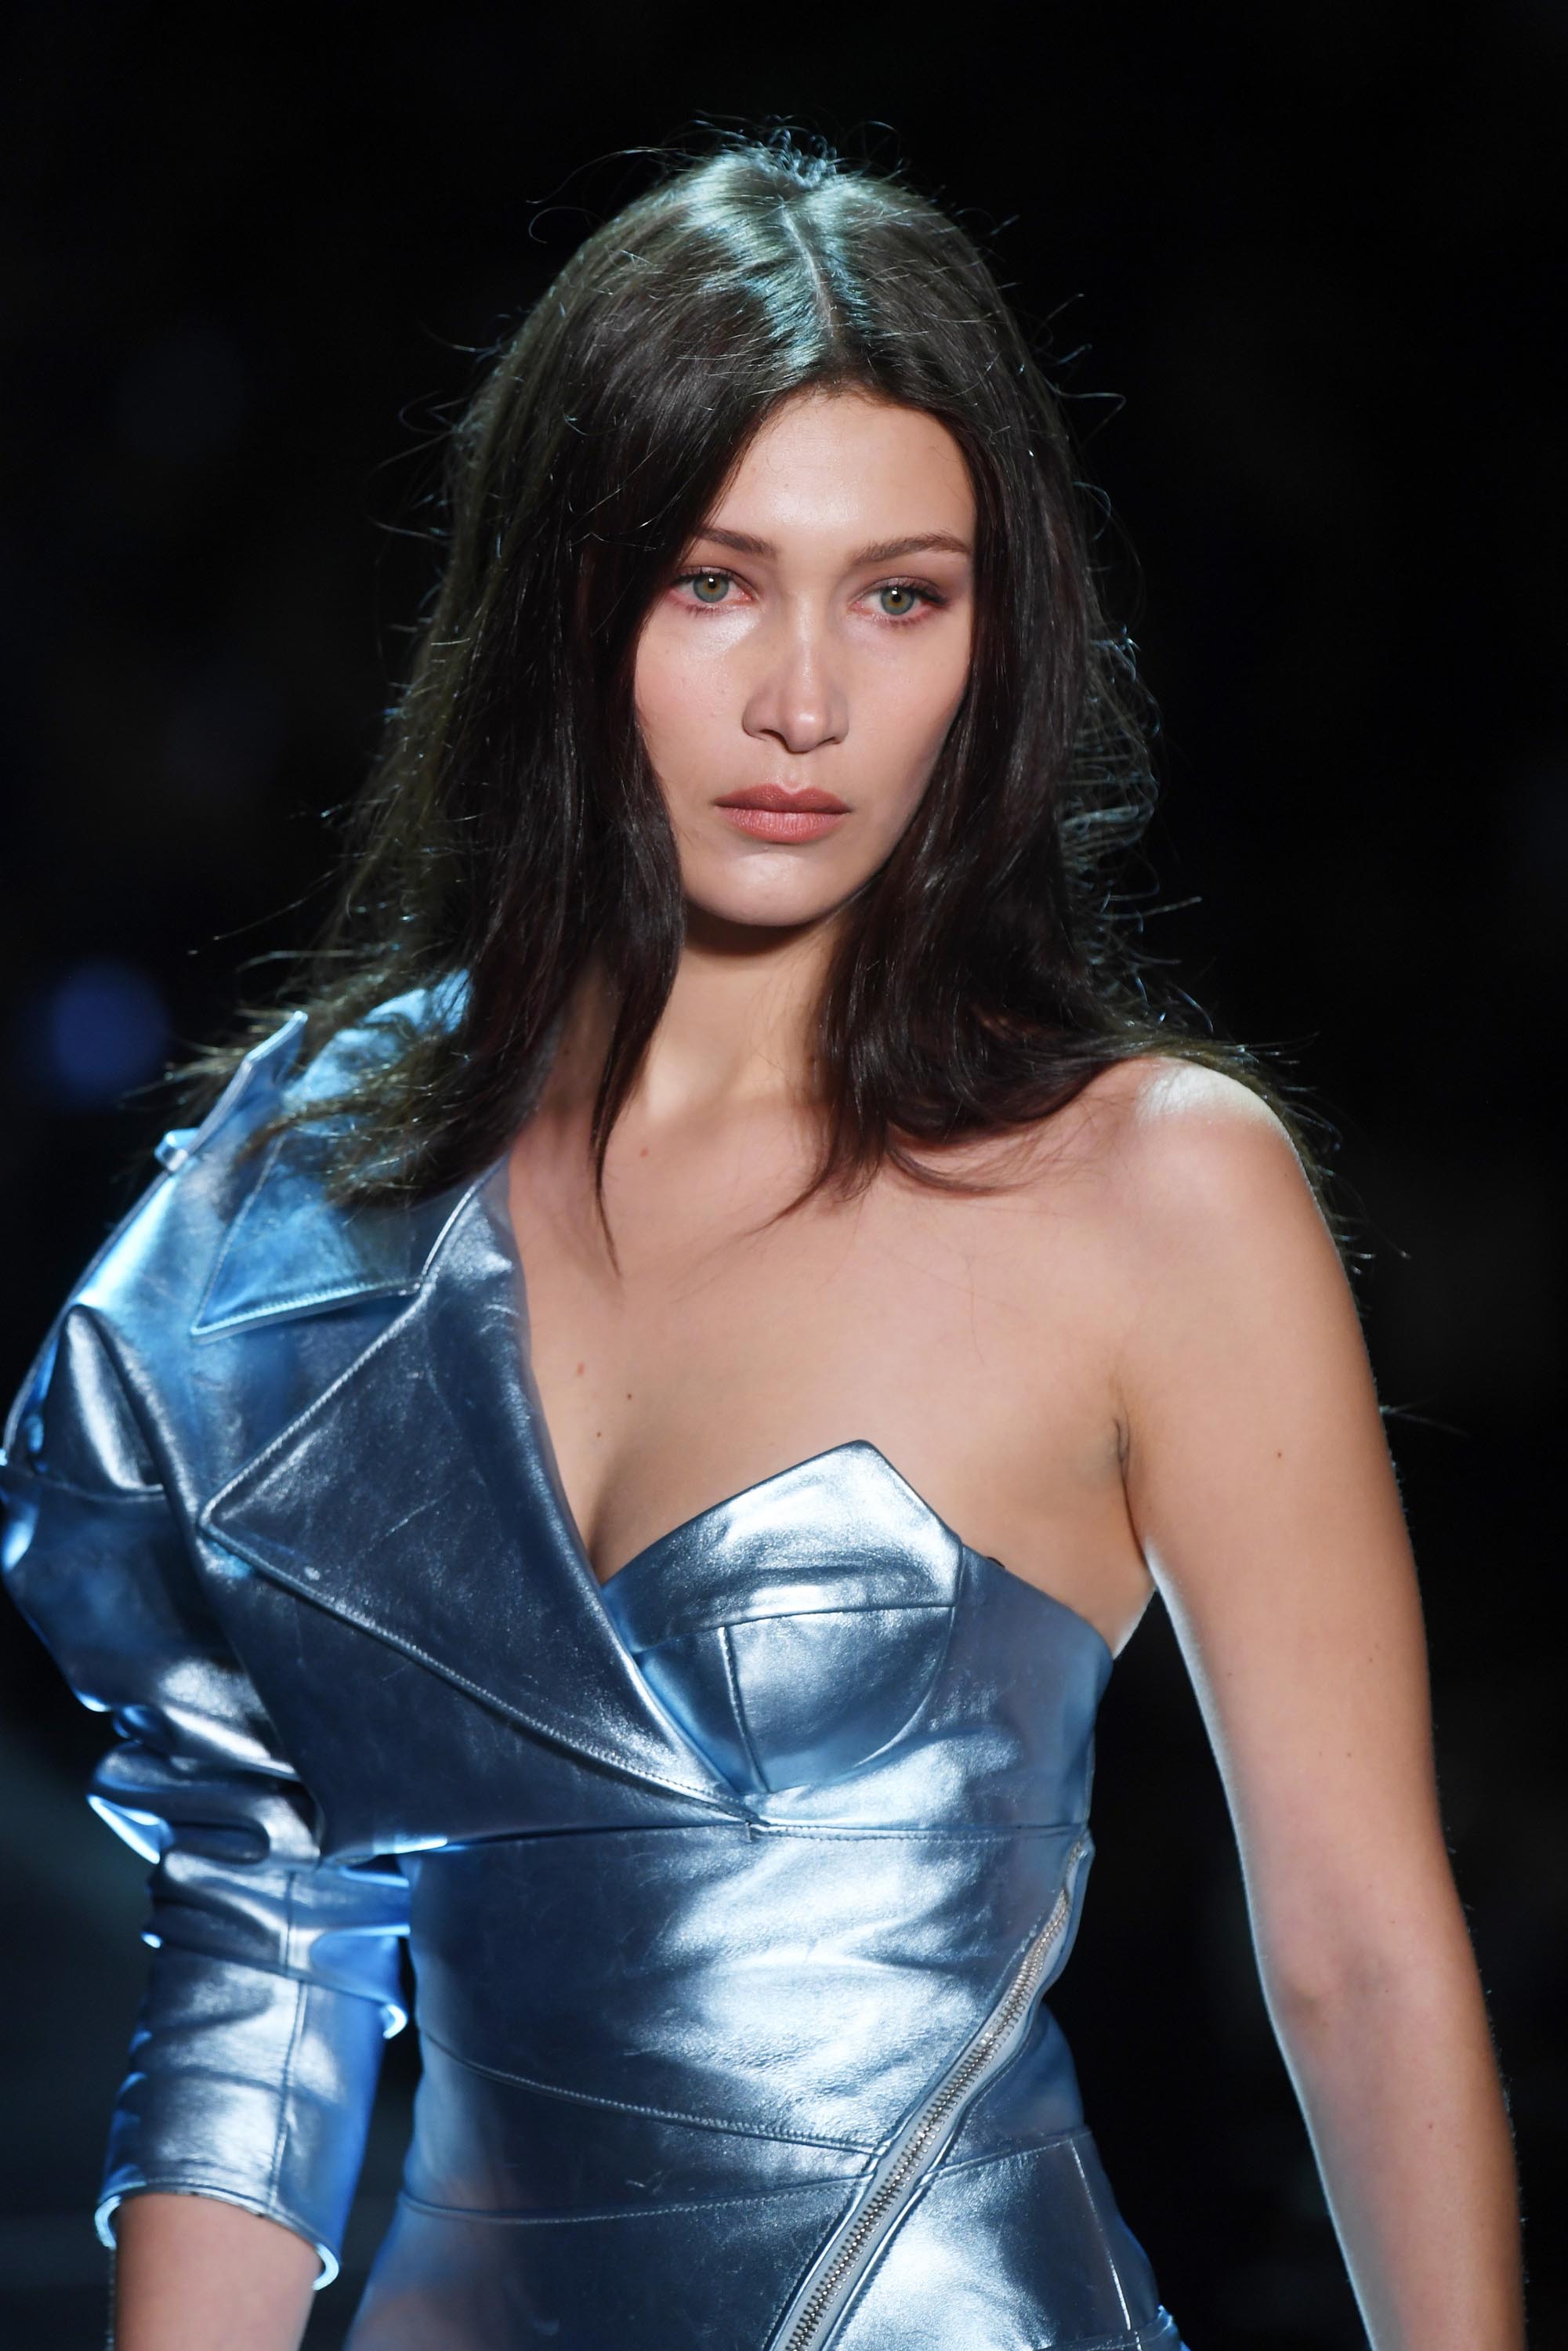 Bella Hadid attends Alexandre Vauthier Haute Couture Spring/Summer 2017 Fashion Show